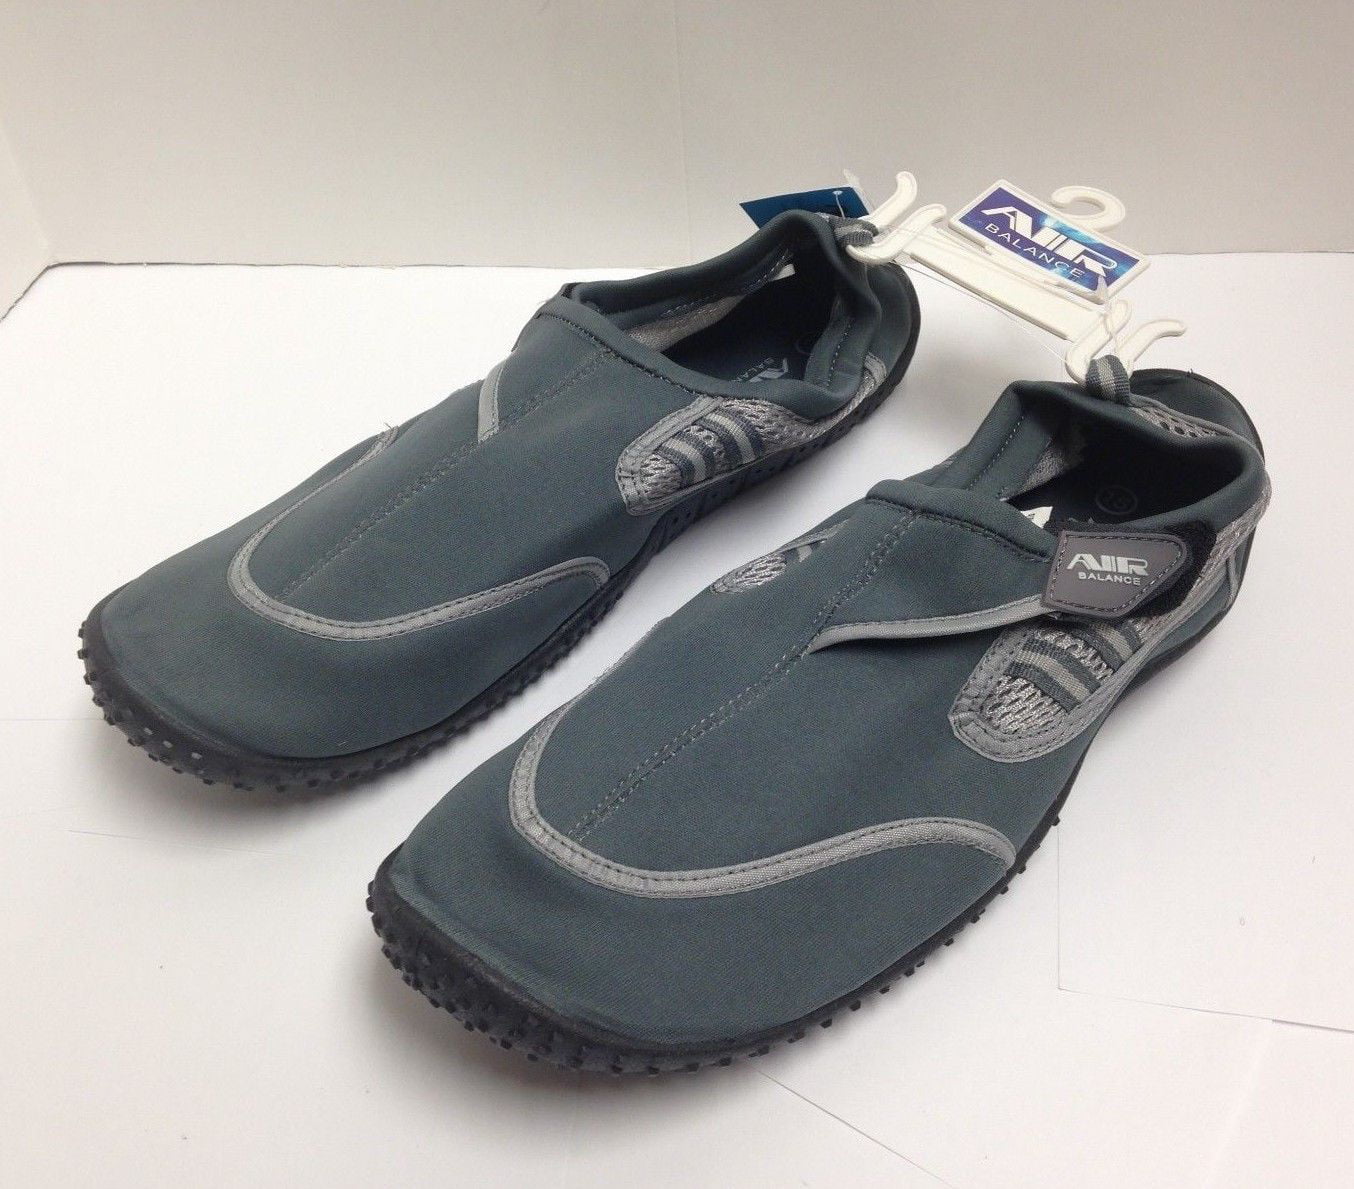 water shoes size 13 mens